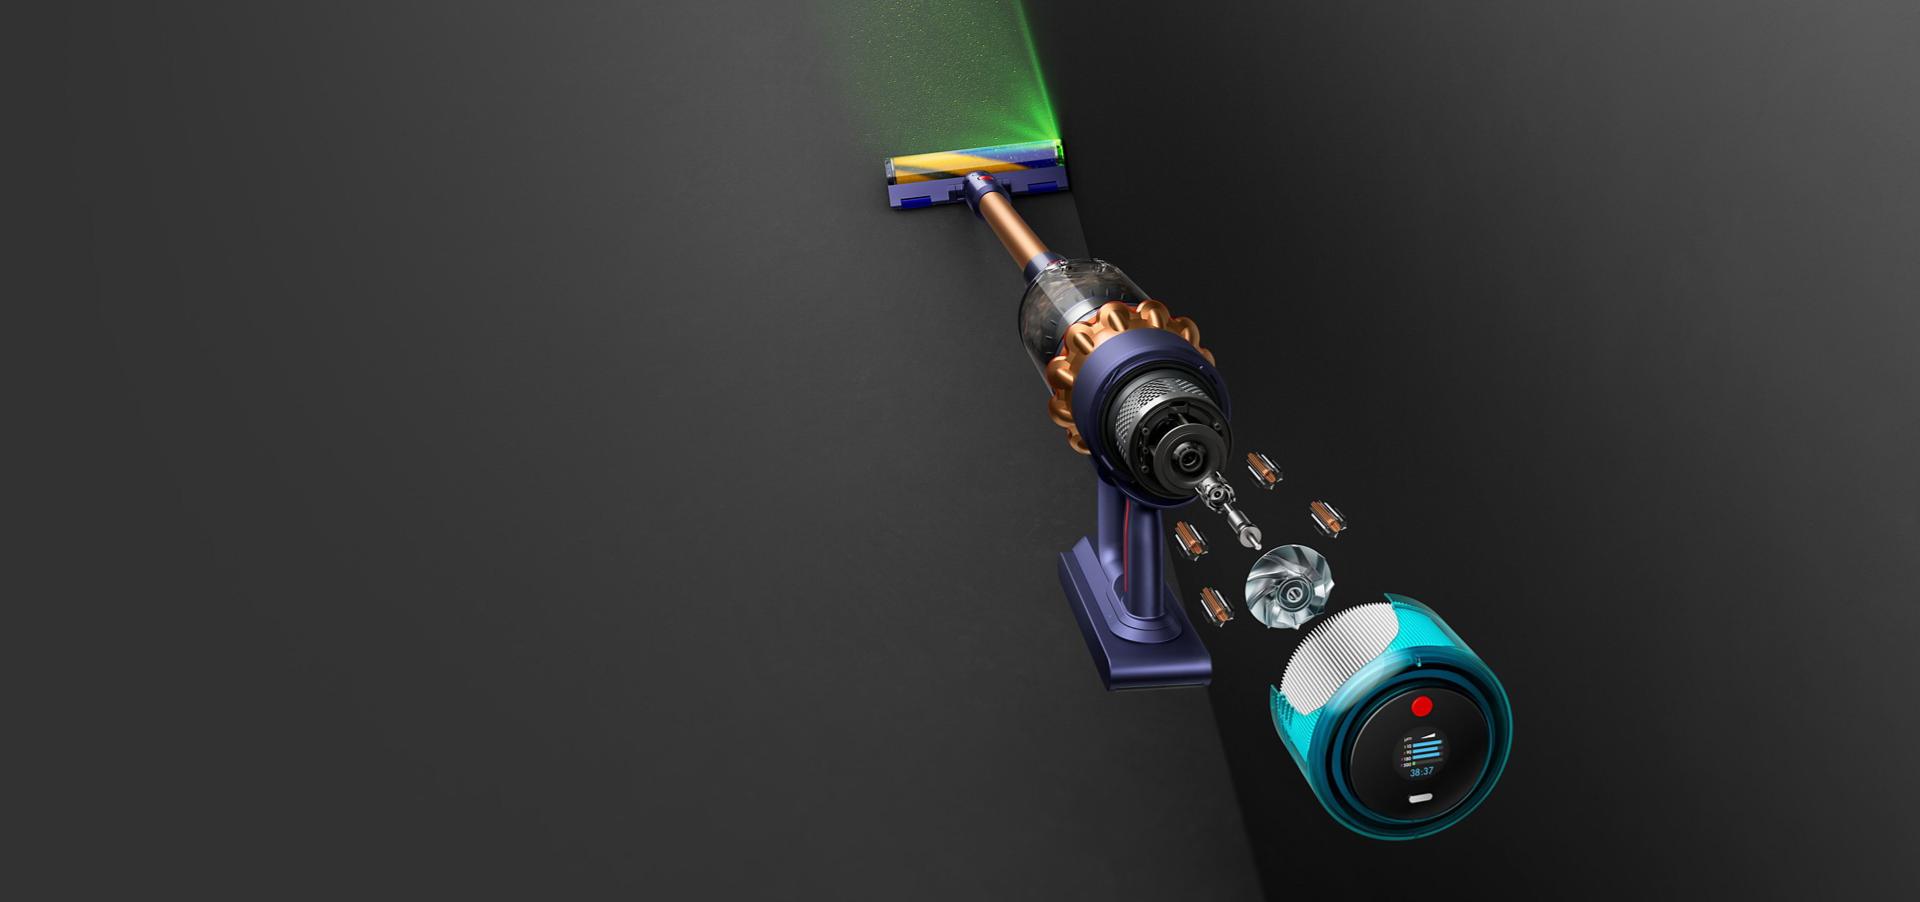 Overhead view of the Dyson Gen5detect with green light emitting from the cleaner head.